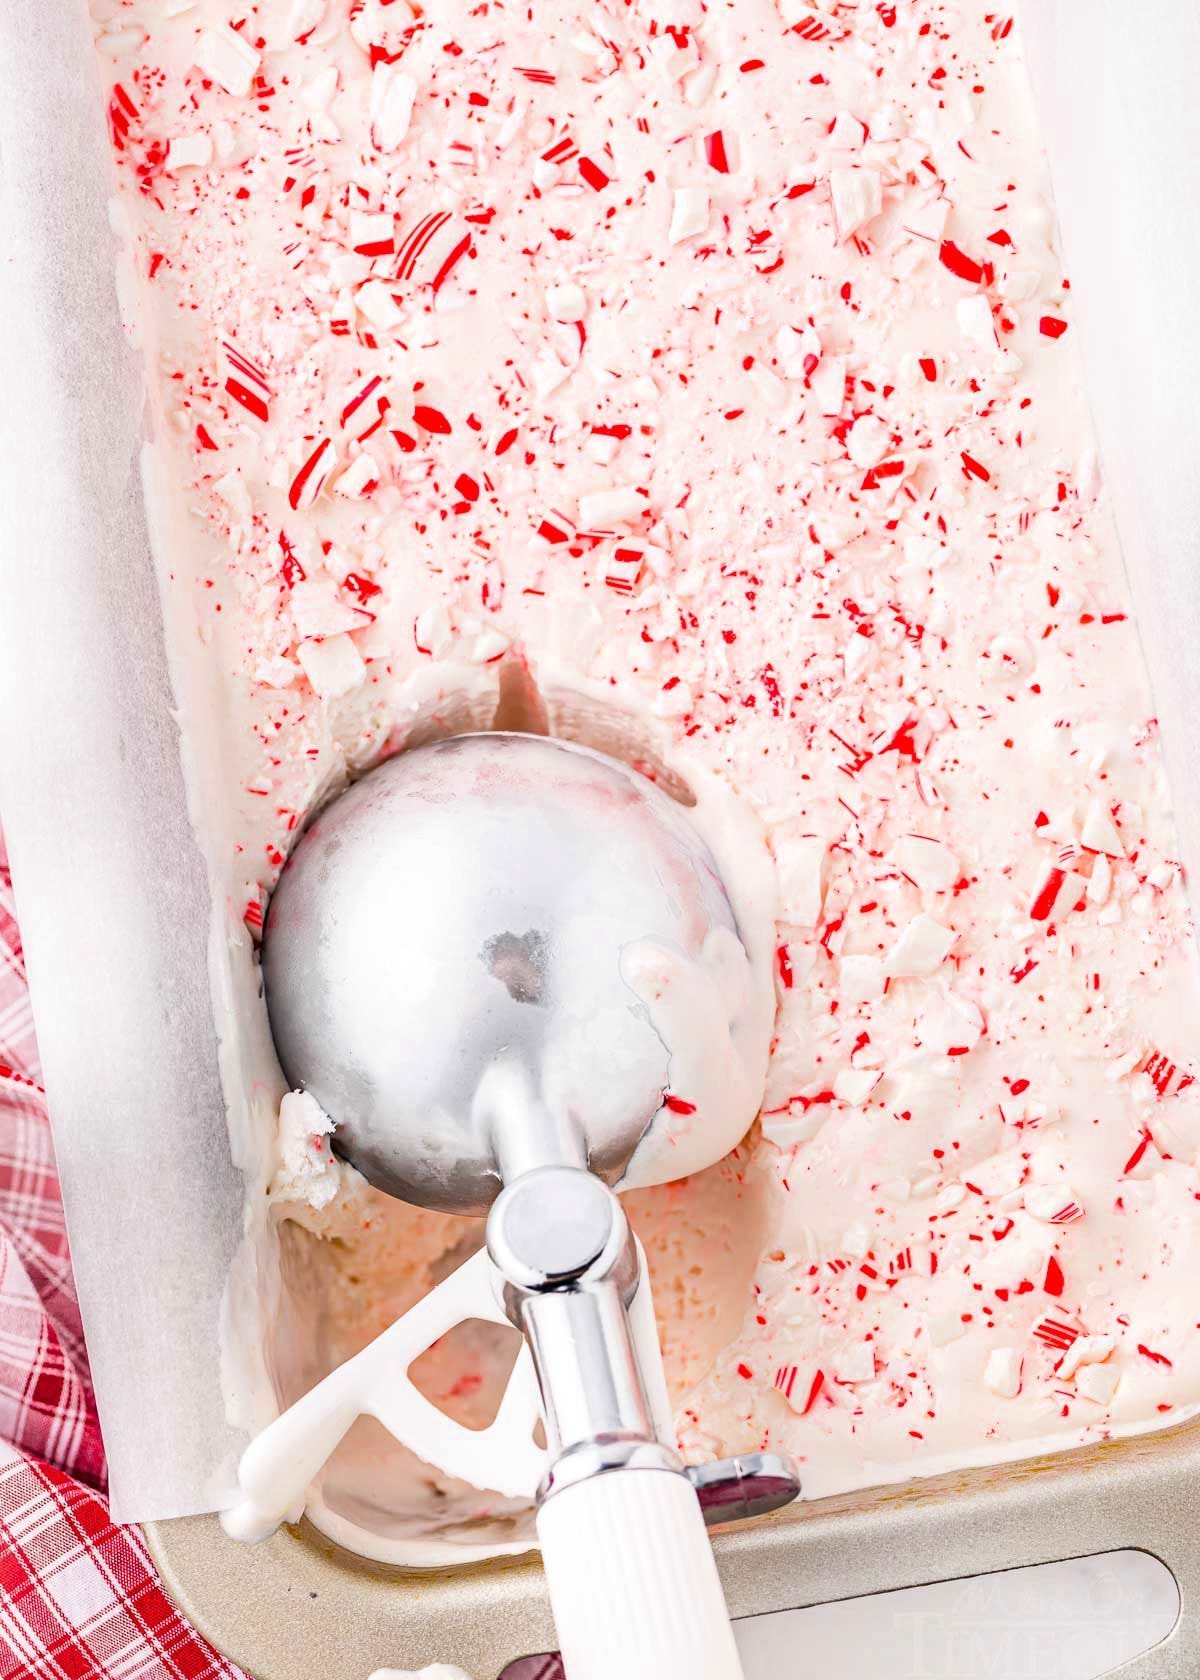 peppermint ice cream being scooped from a loaf pan.